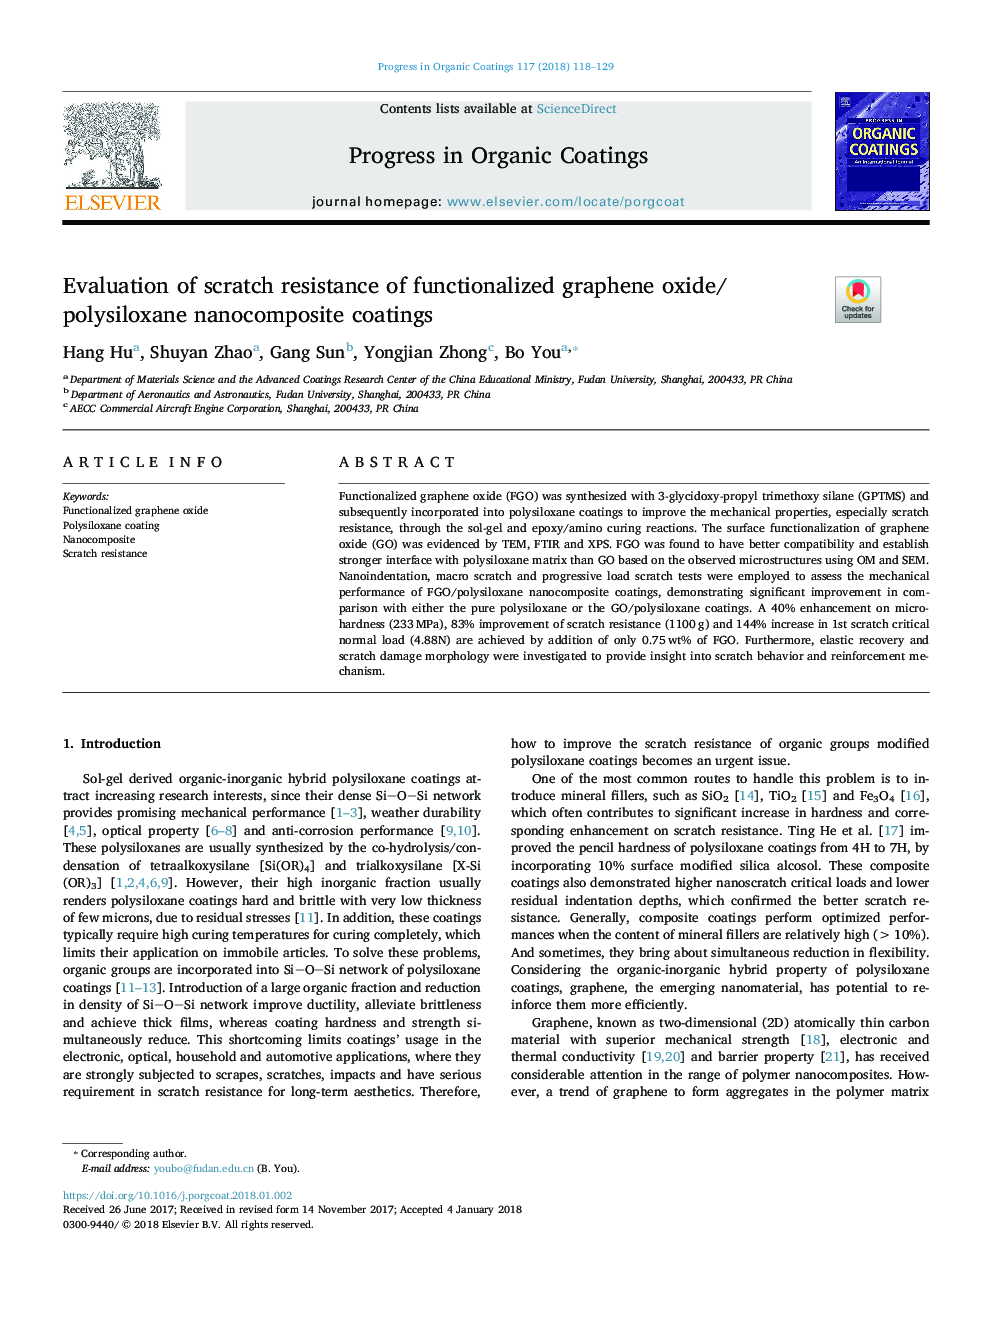 Evaluation of scratch resistance of functionalized graphene oxide/polysiloxane nanocomposite coatings